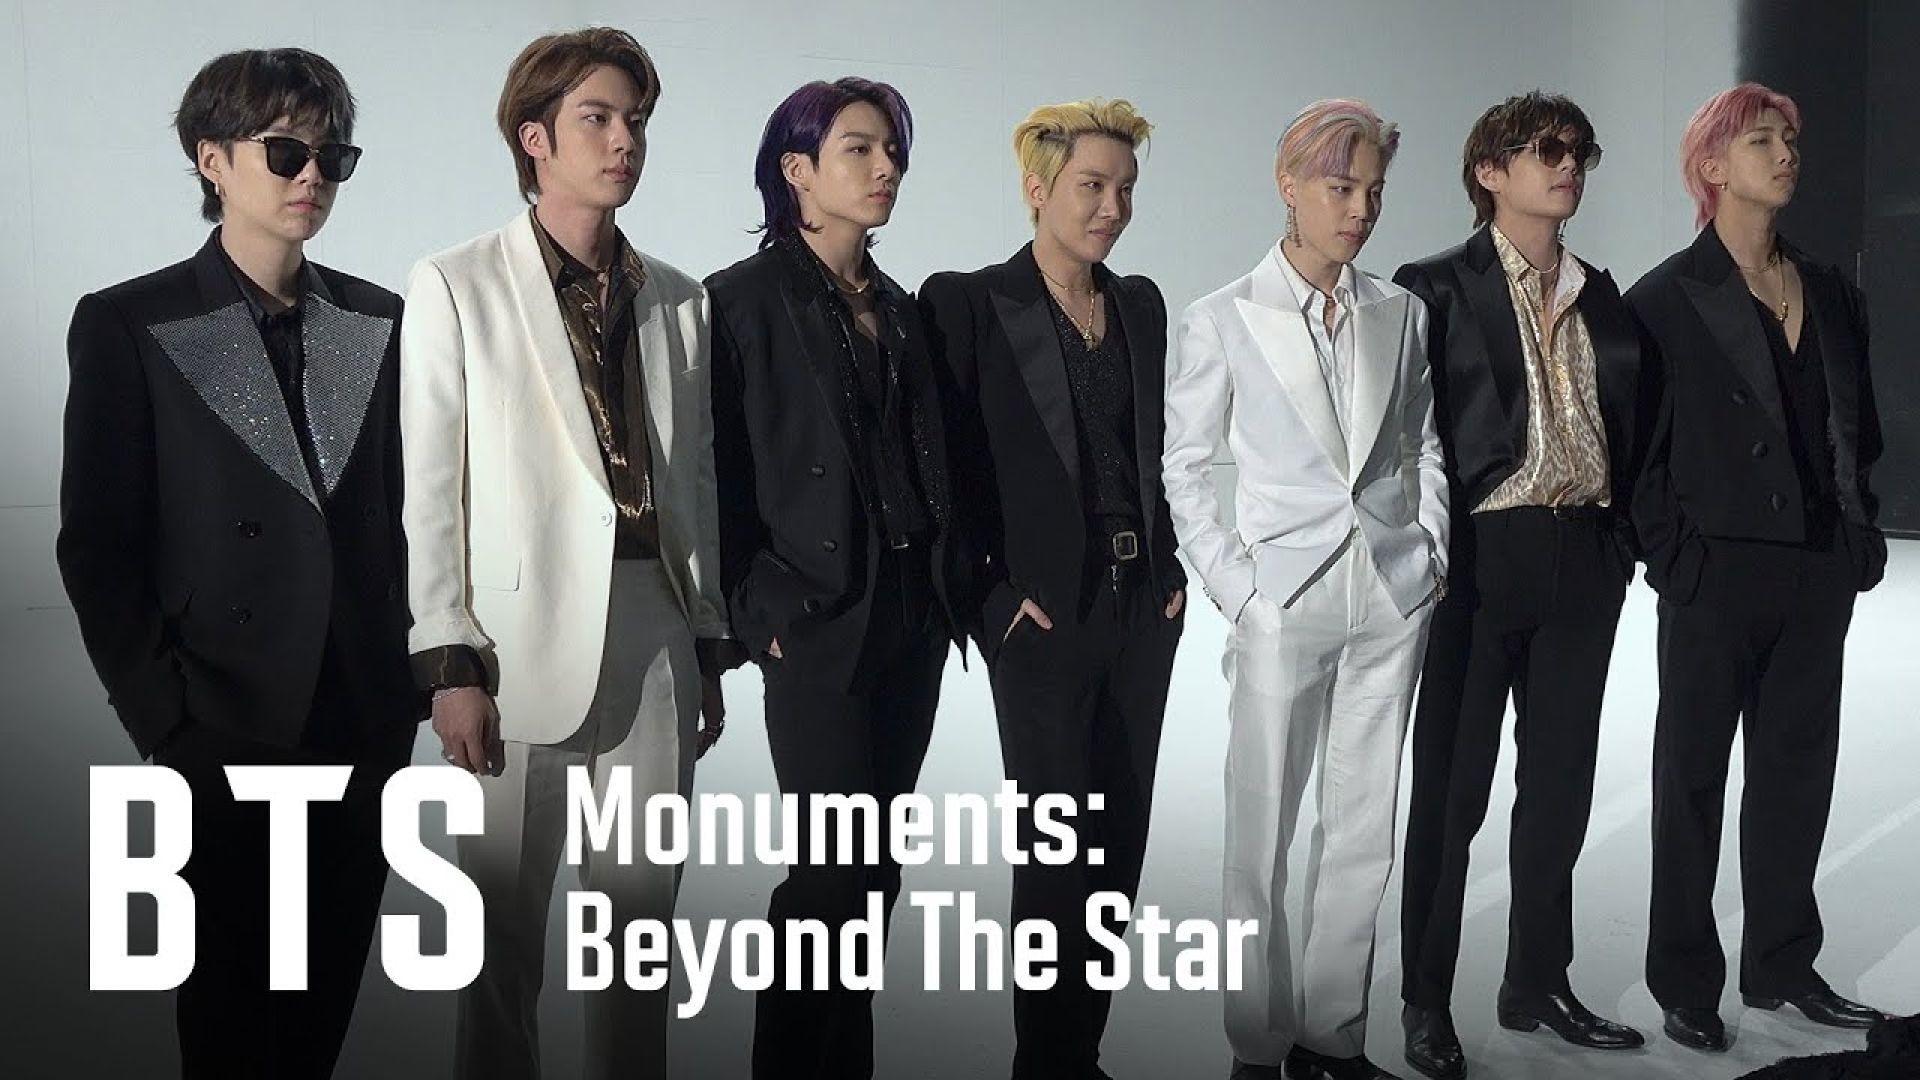 ep  1 - The Beginning  BTS Monuments: Beyond The Star